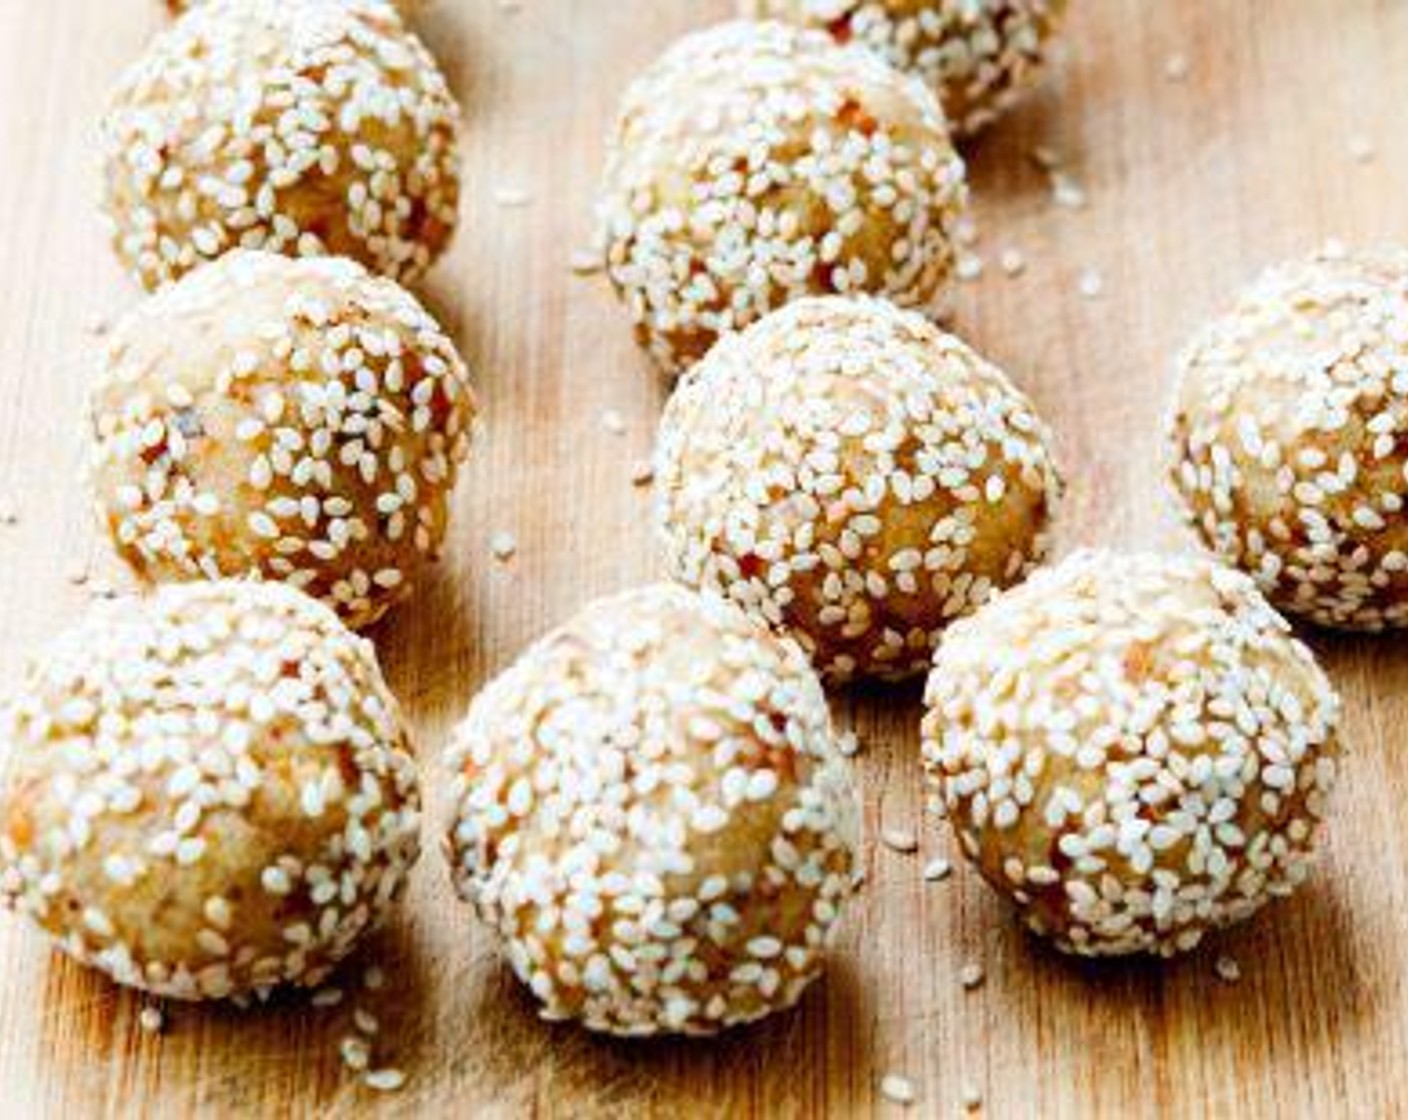 step 3 Using your hands, roll the mixture into 30-gram balls and coat them in White Sesame Seeds (to taste).